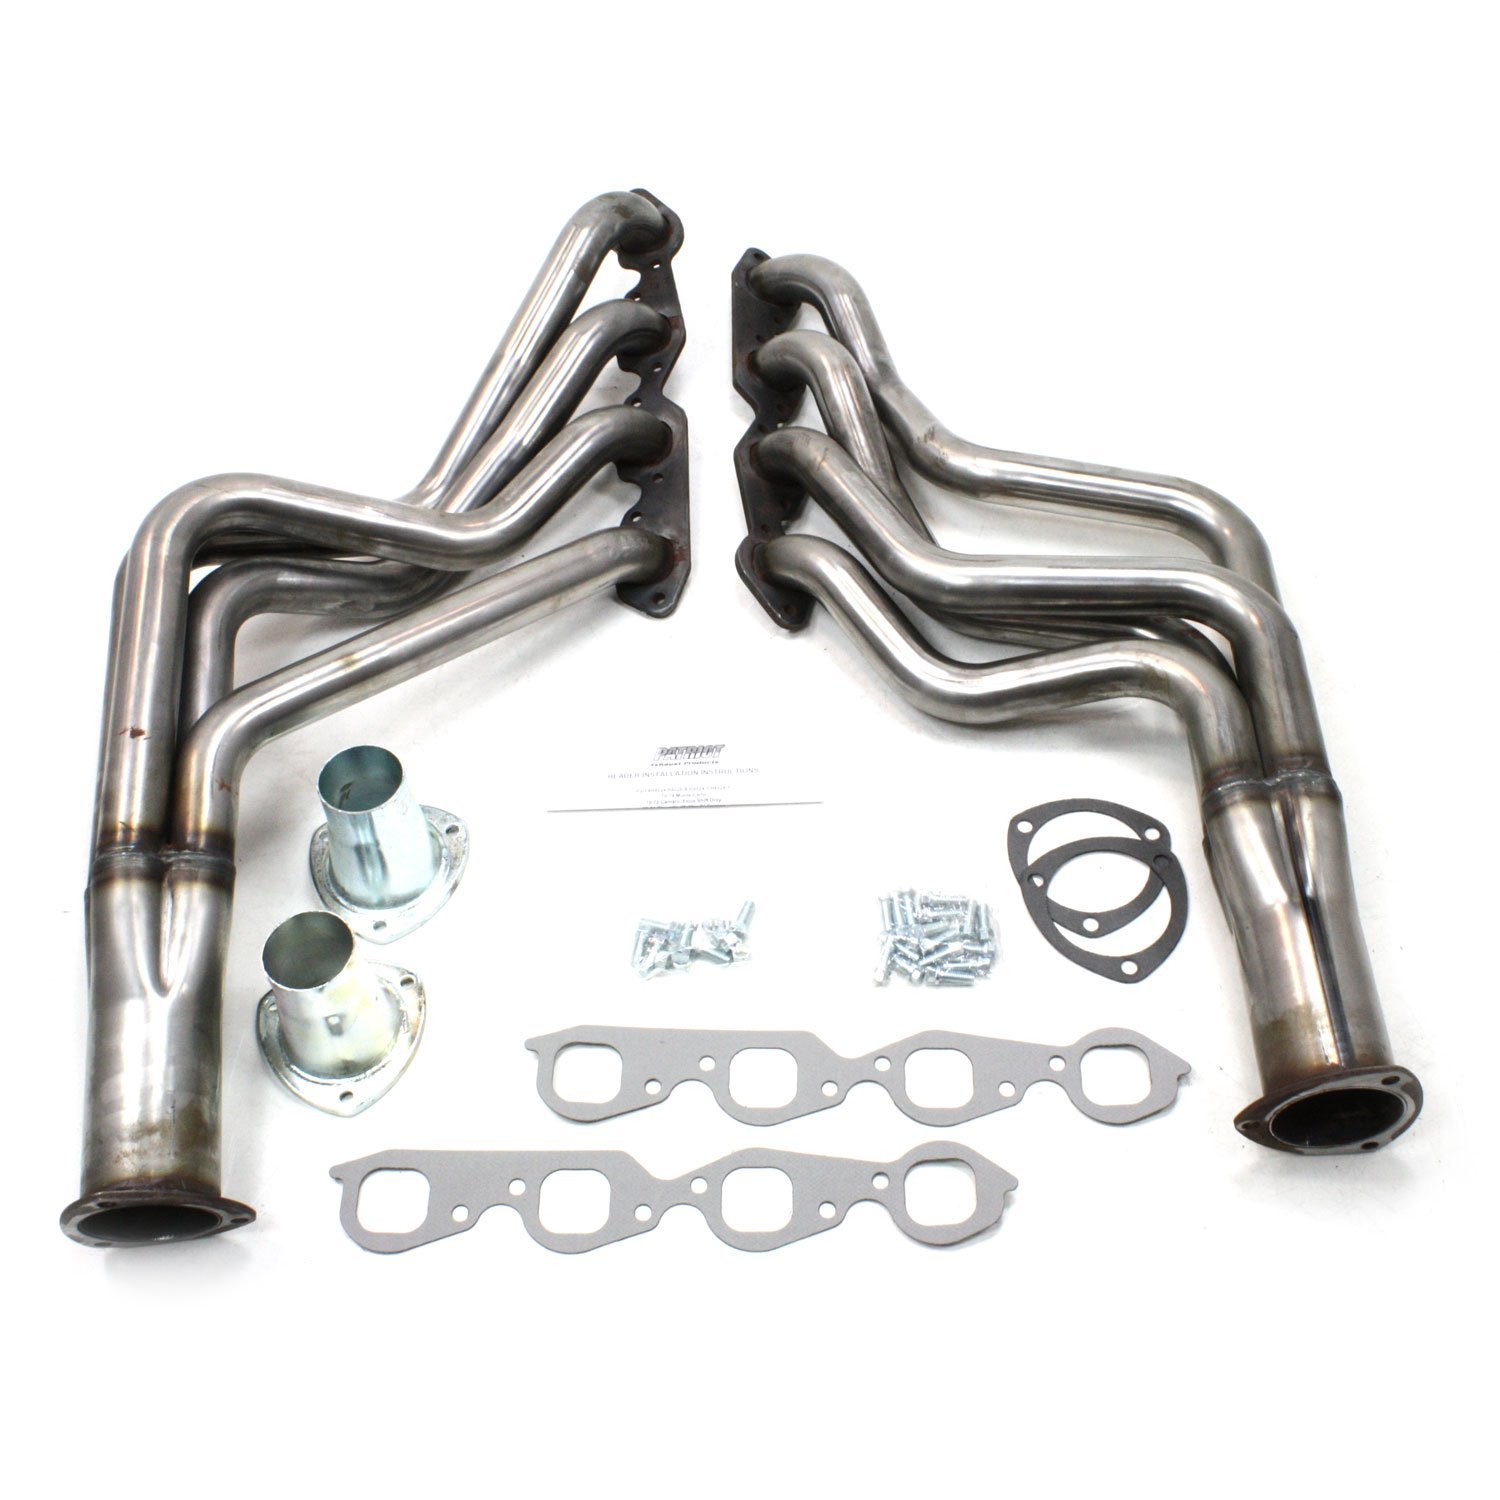 GM Specific Fit Headers 1971-1974 Full Size Passenger